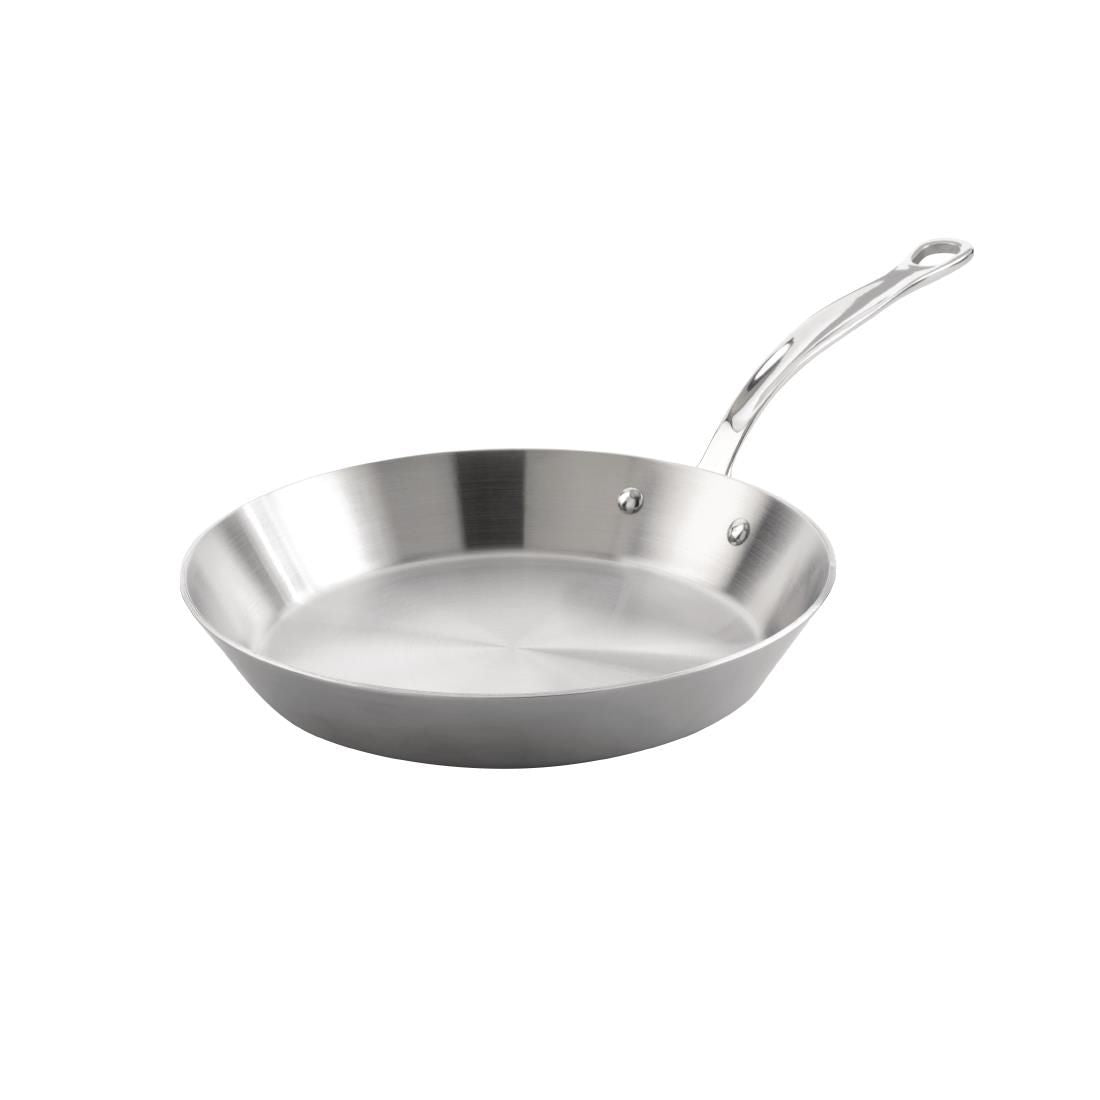 FD093 Samuel Groves Copper Core 5-Ply Frying Pan 260mm JD Catering Equipment Solutions Ltd